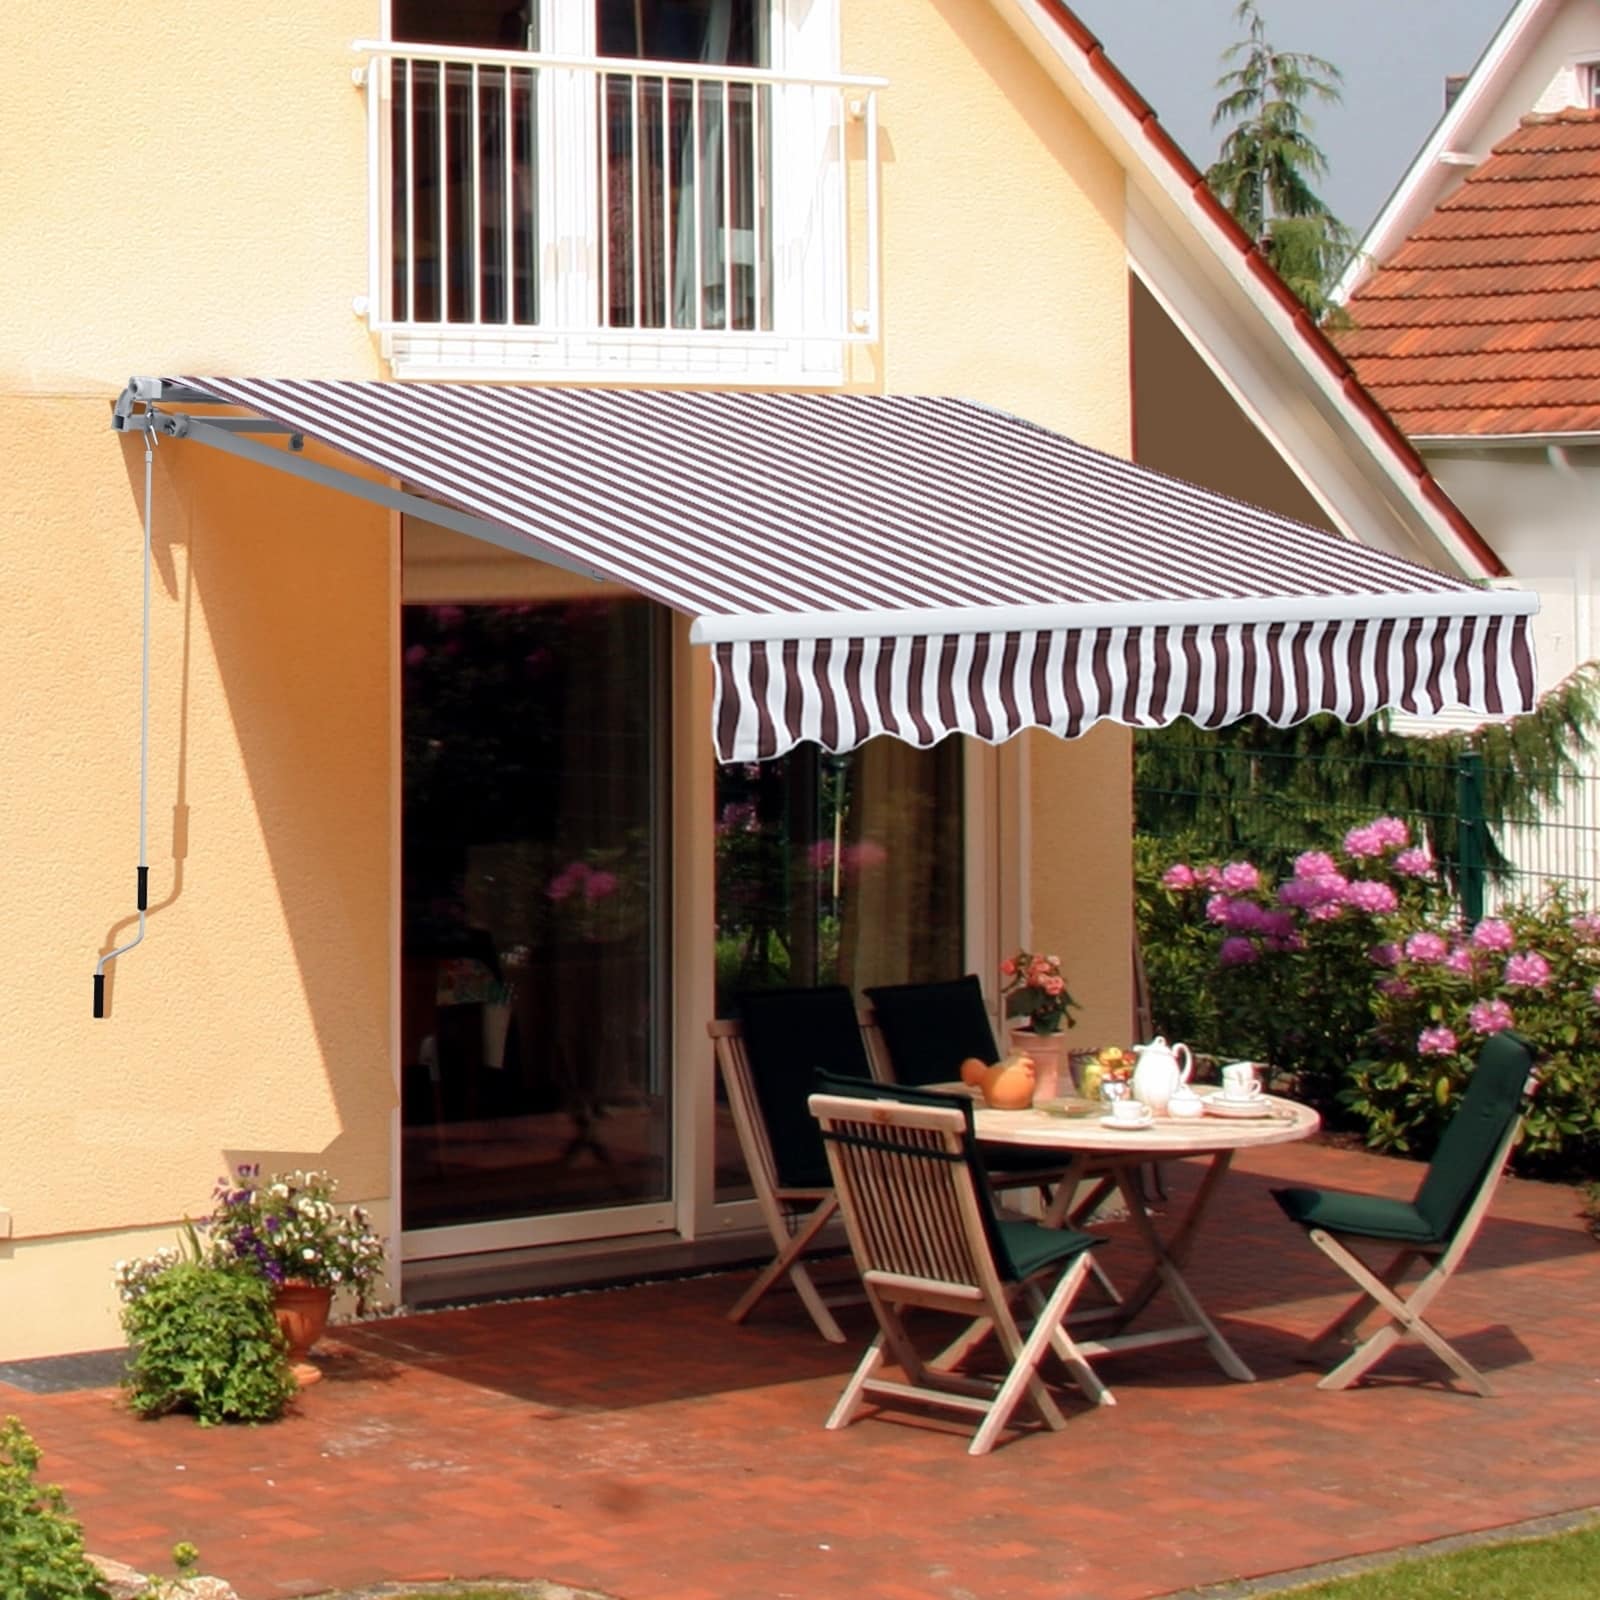 Outsunny 10x8 Retractable Sun Shade Patio Window Awning That Opens Smooth Quietly